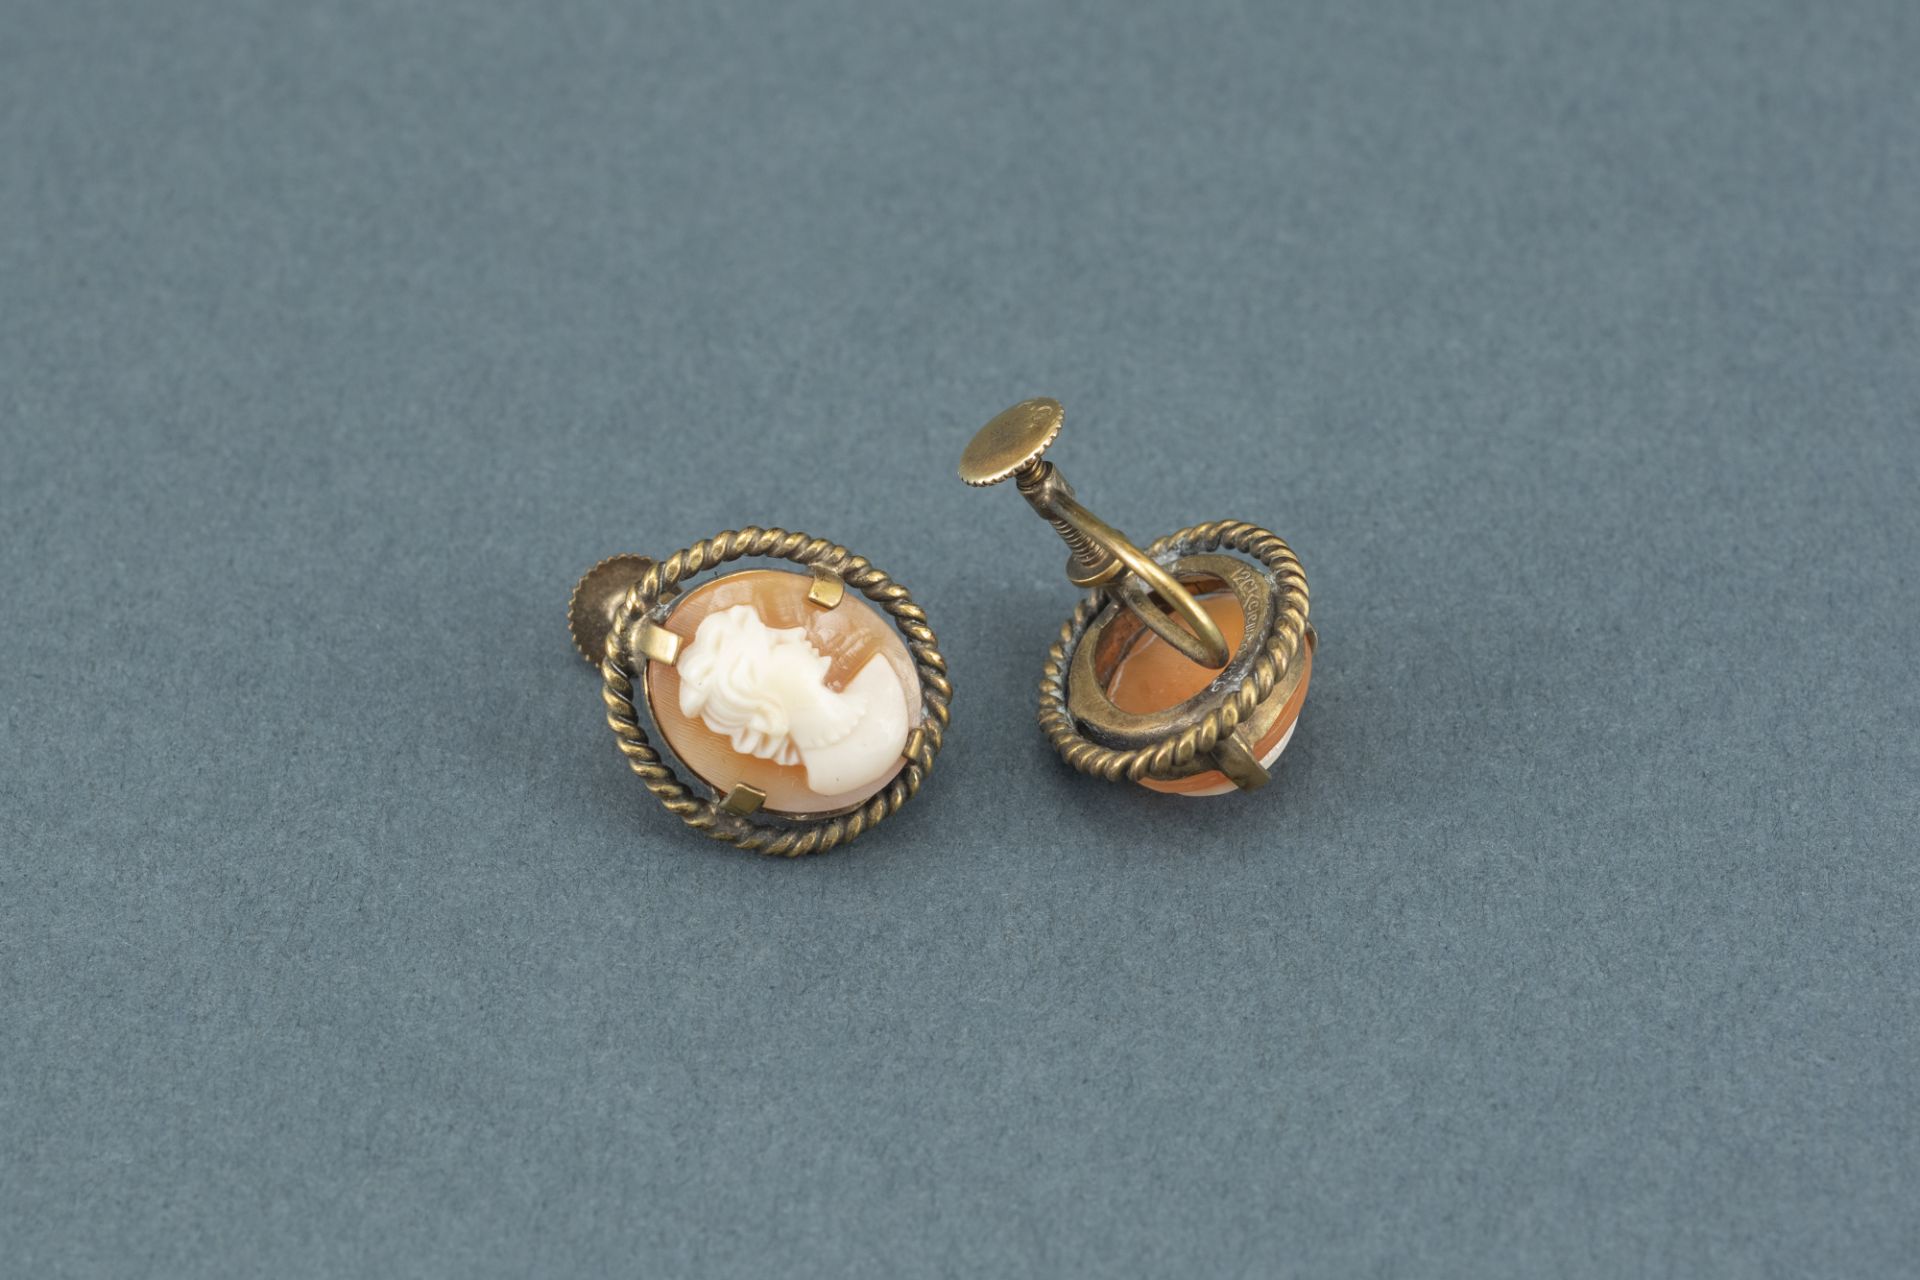 Shell cameo gold earrings - Image 3 of 4